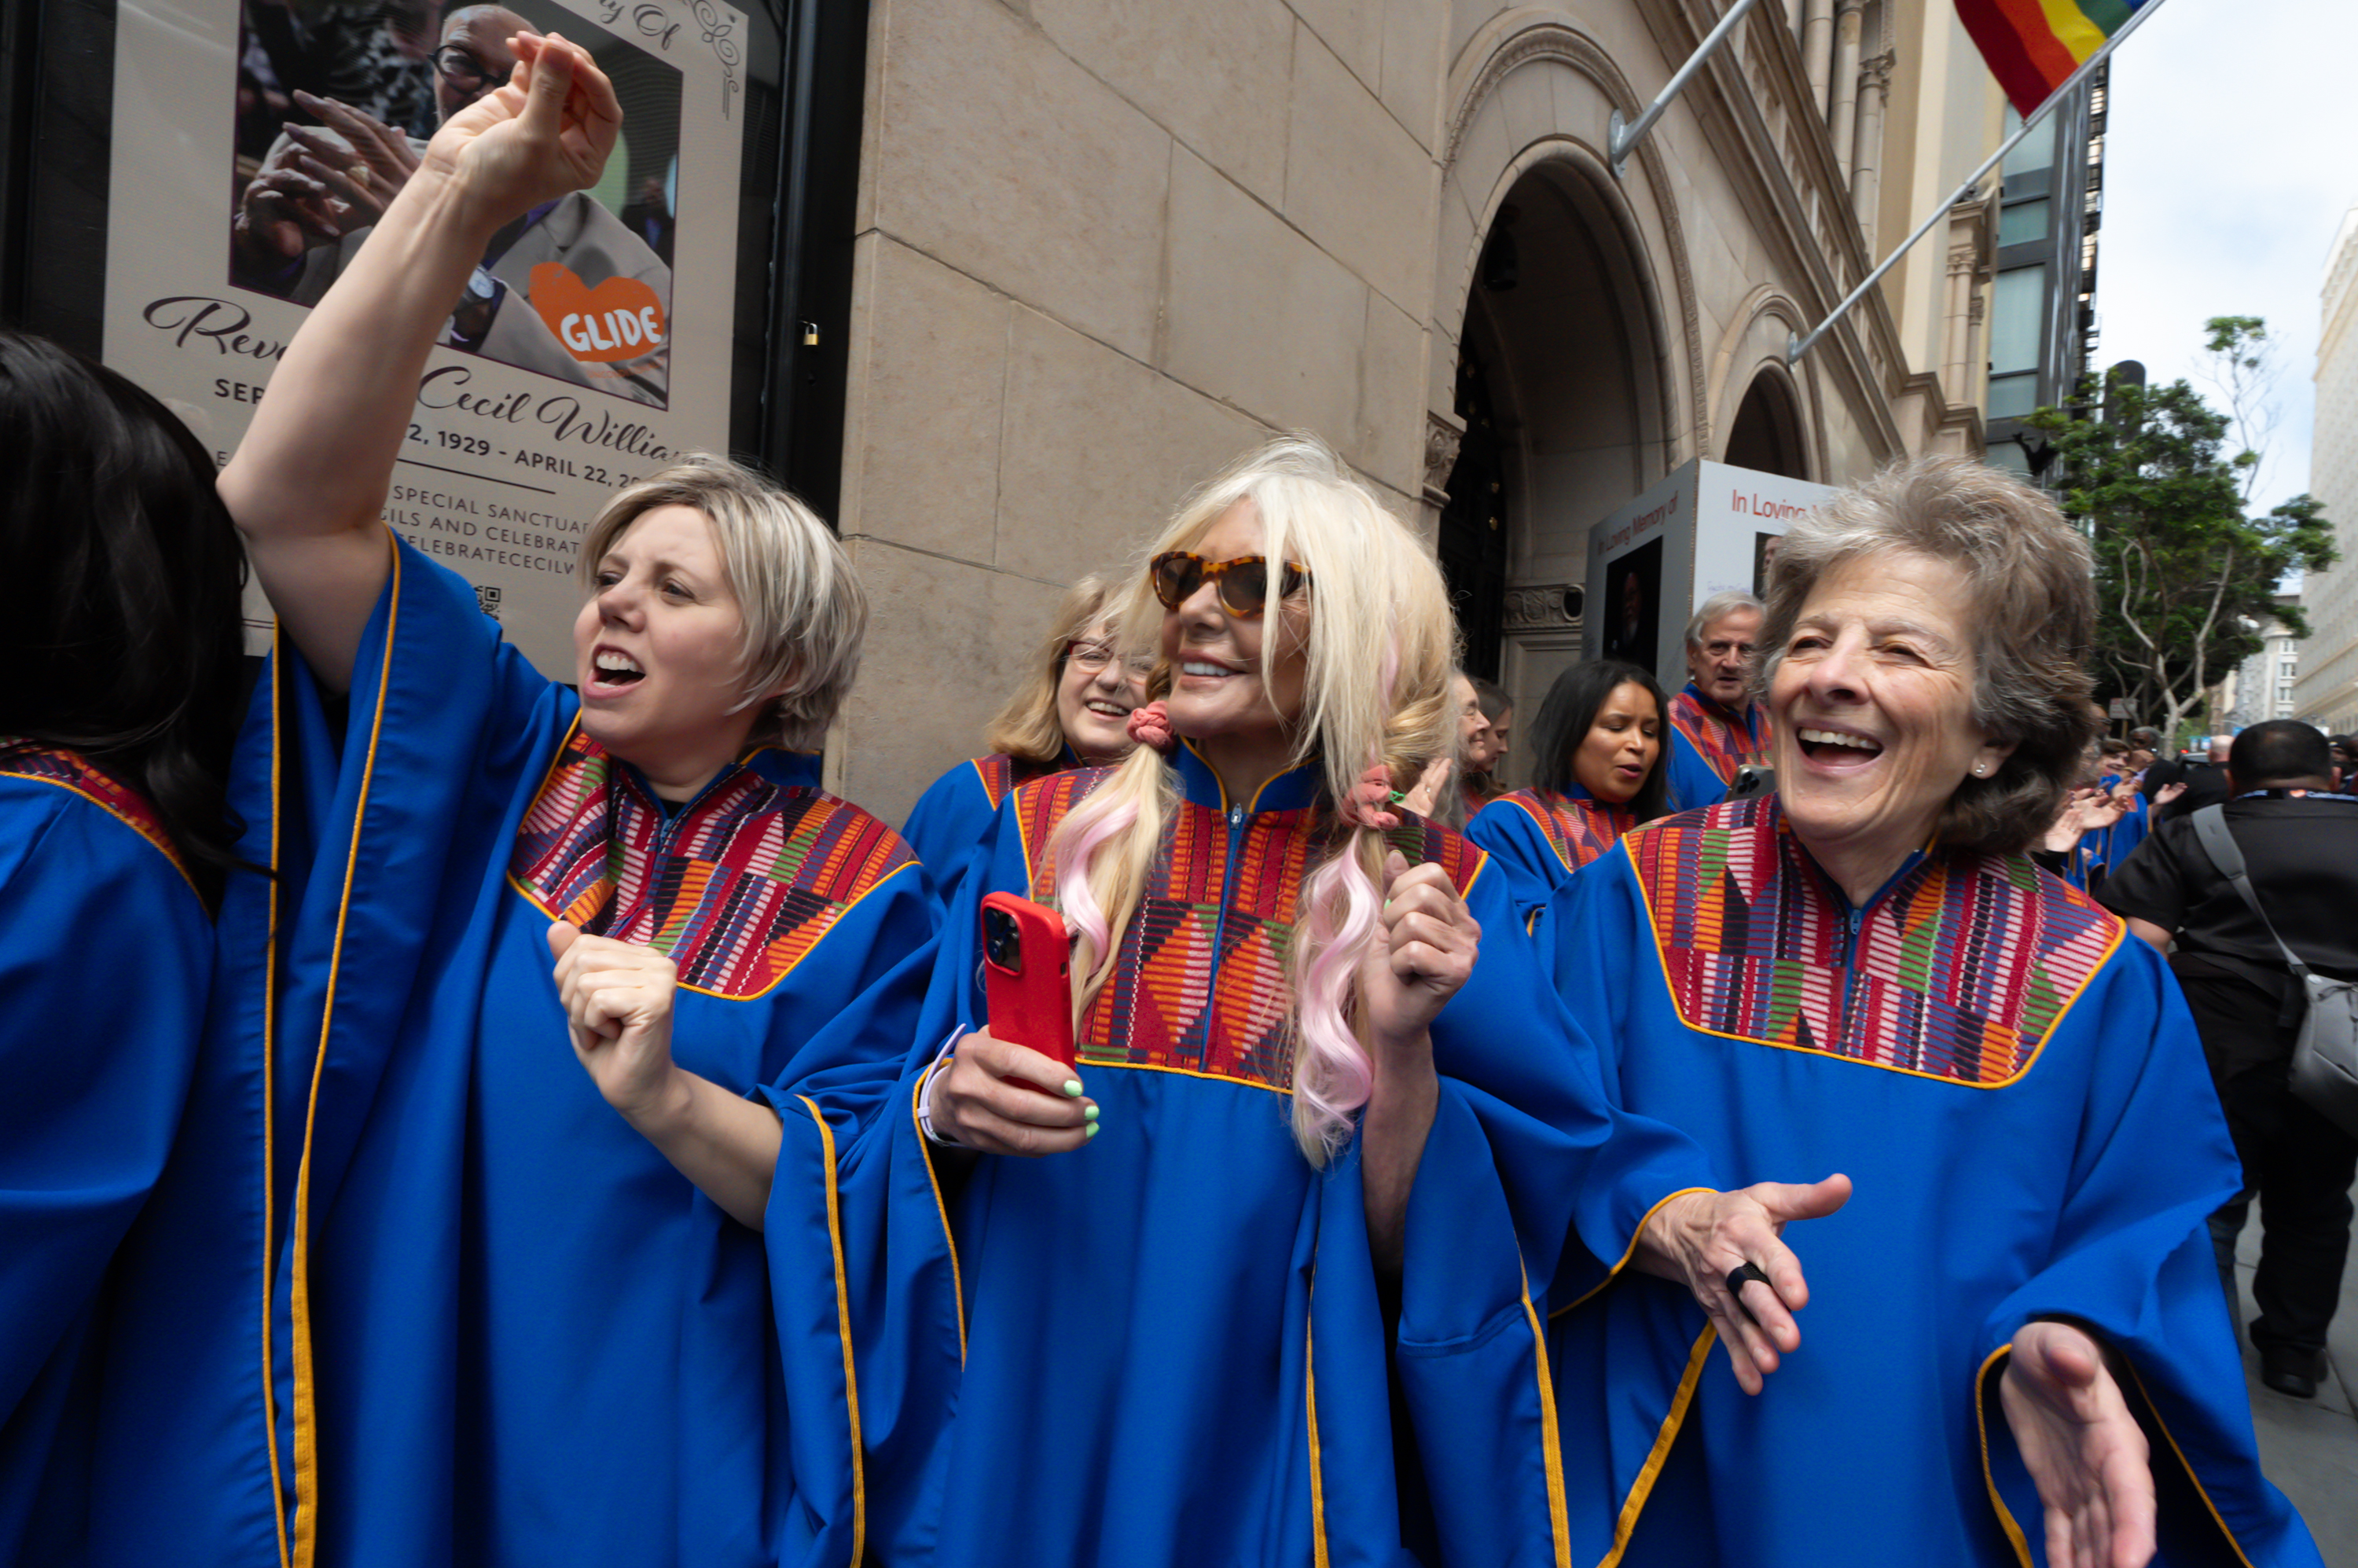 Joyful people in blue robes with colorful stoles are walking and celebrating outside.